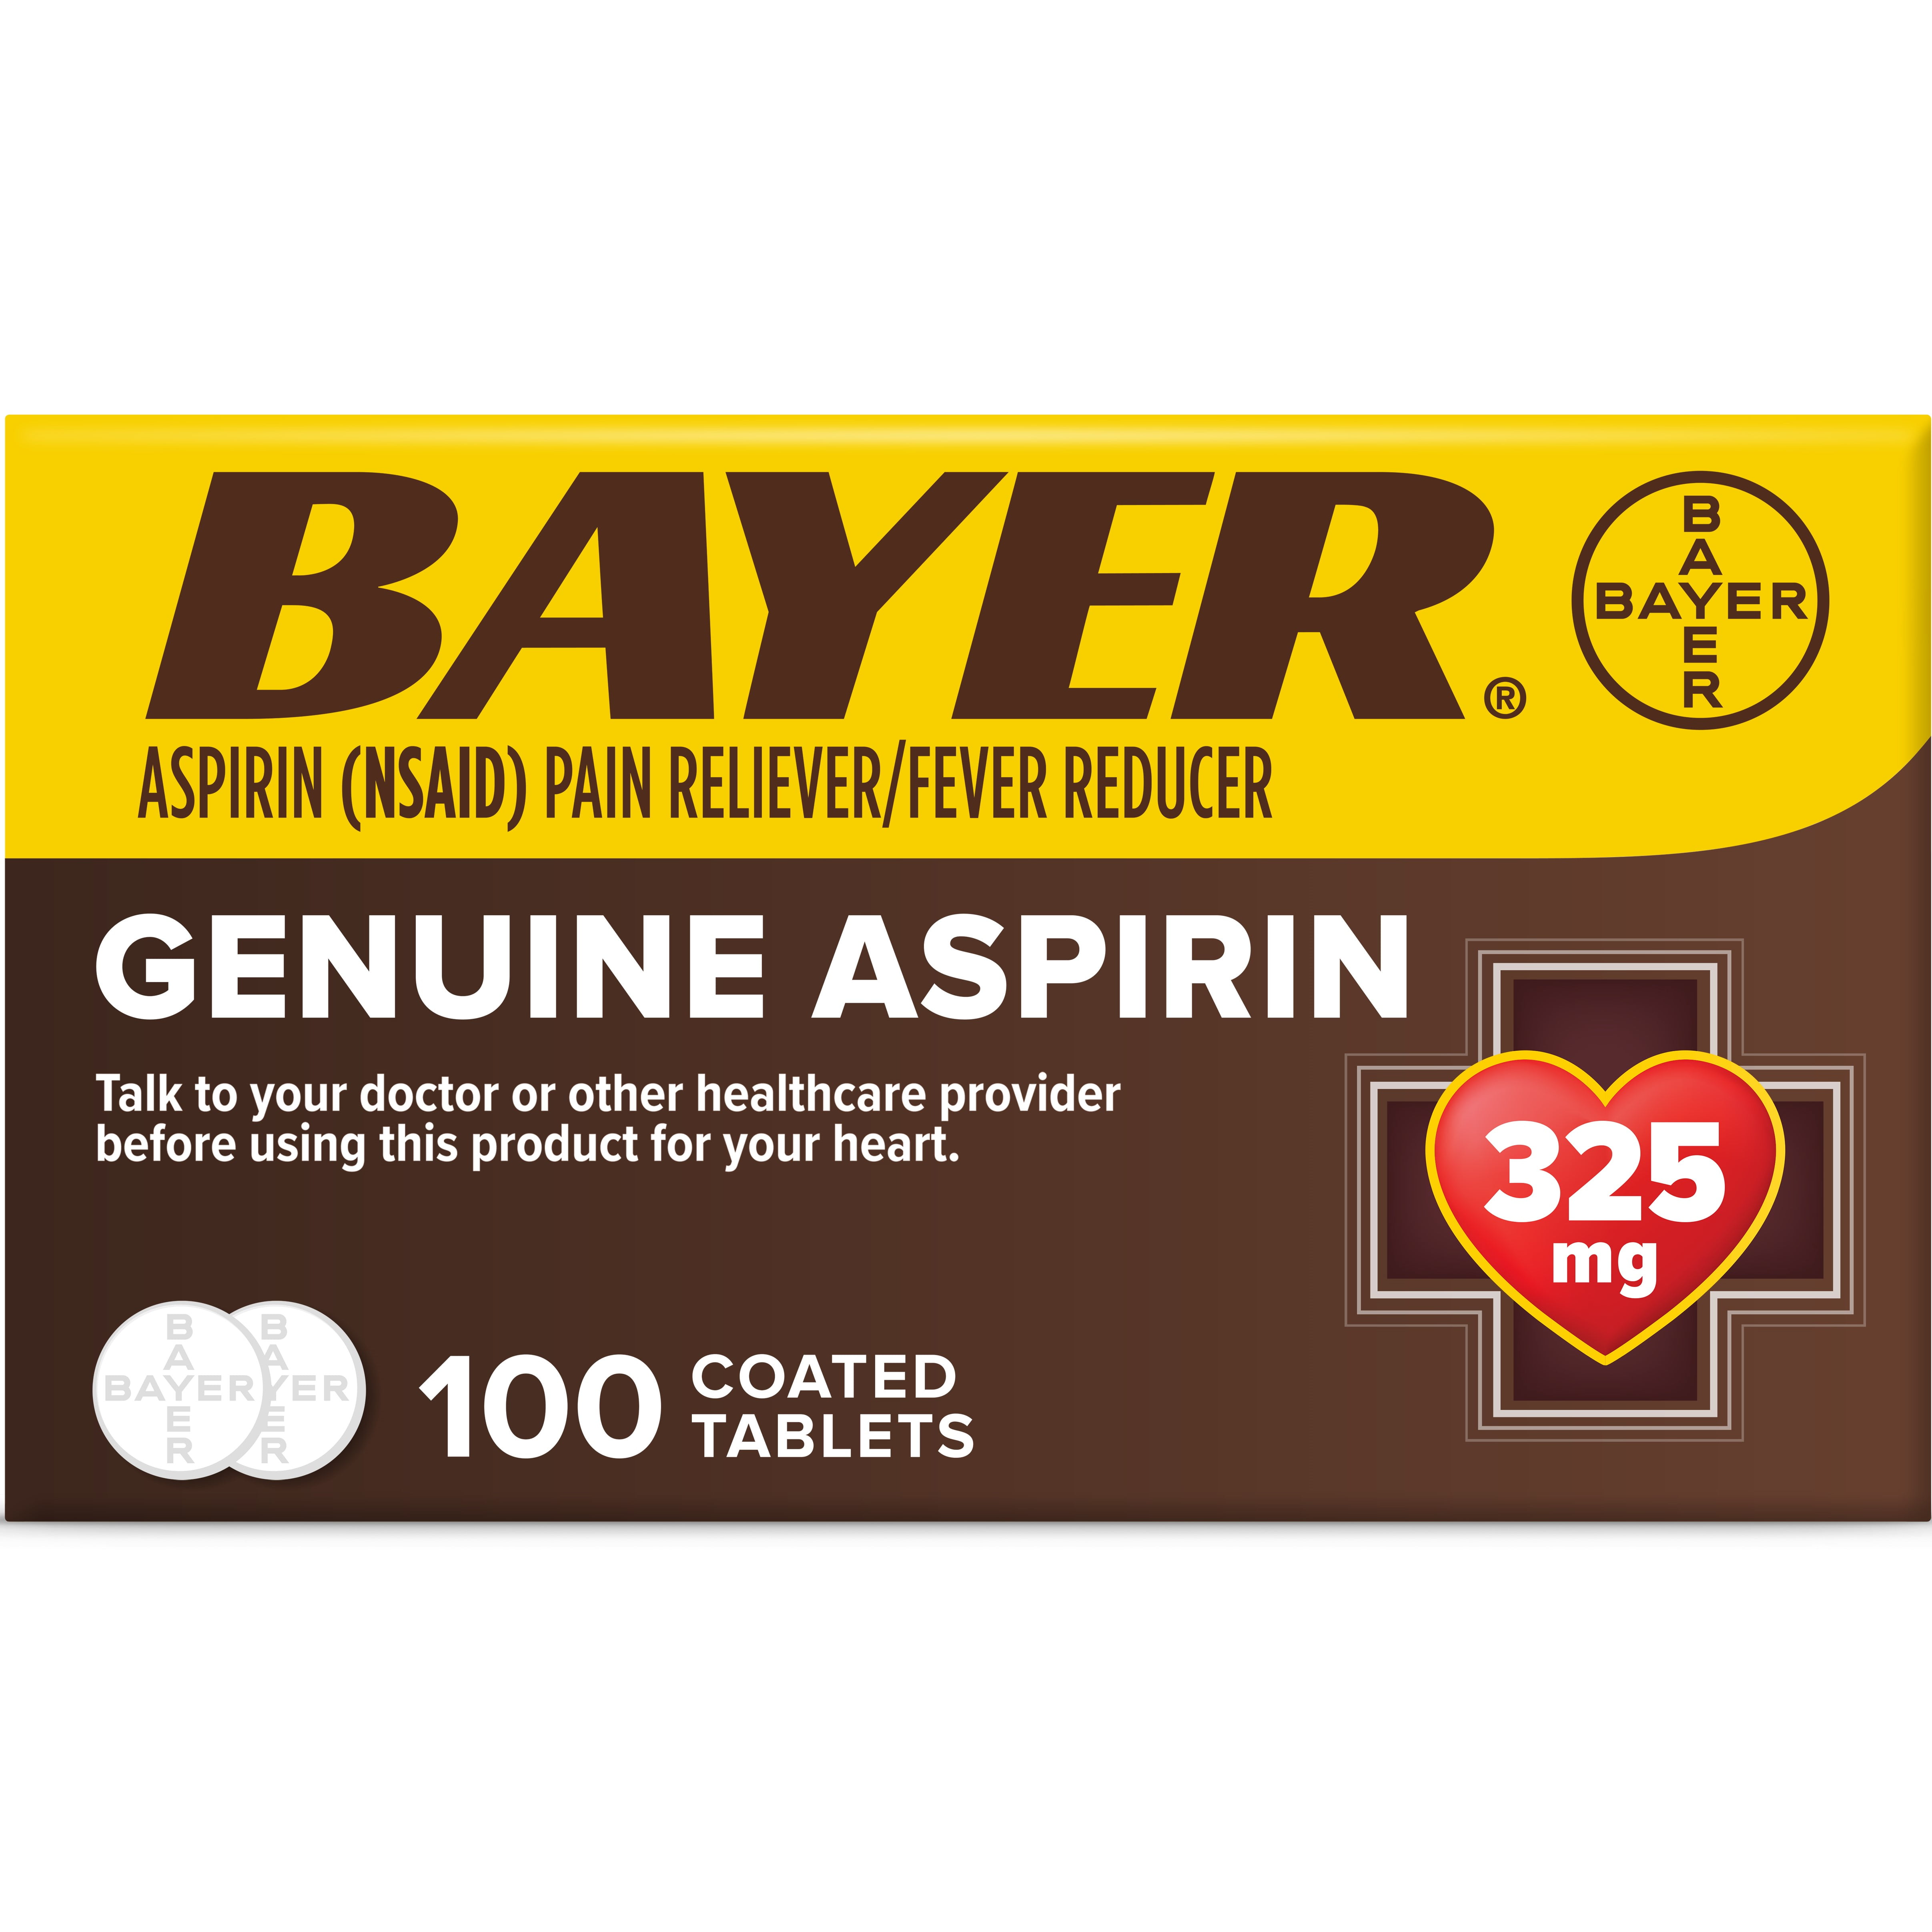 Genuine Bayer Aspirin Pain Reliever / Fever Reducer 325mg Coated Tablets, 100 Ct